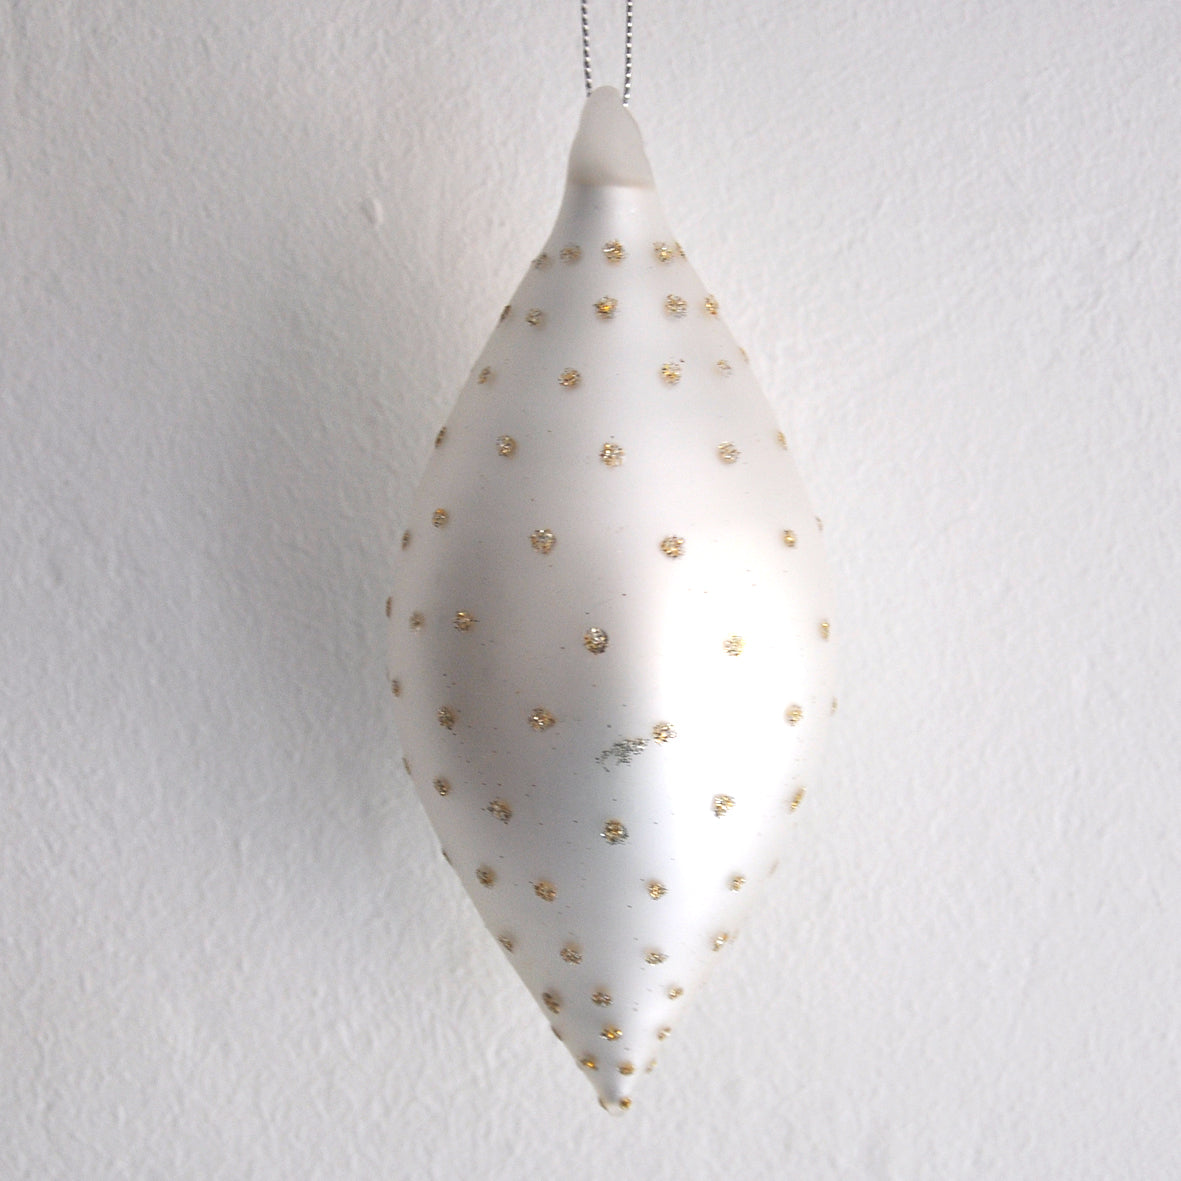 Small Silver White Finial Shaped Gold Polkadot Christmas Decoration for Christmas Trees